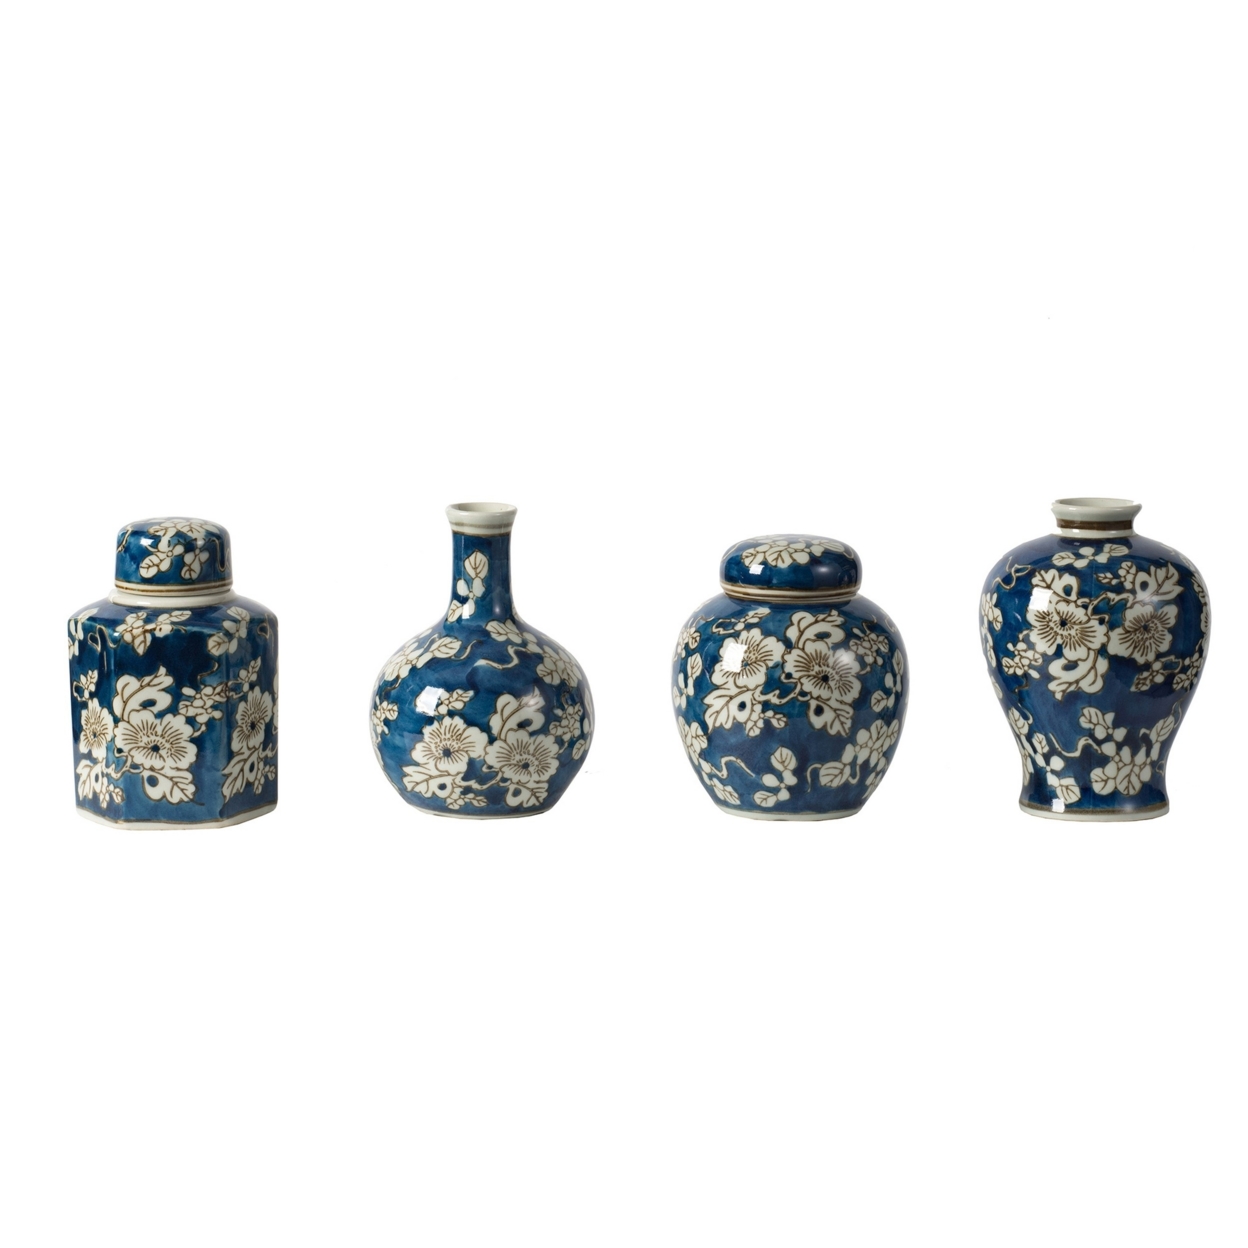 Set Of 4 Lidded Jars And Vases, Classic Curved Round Blue And White Ceramic- Saltoro Sherpi